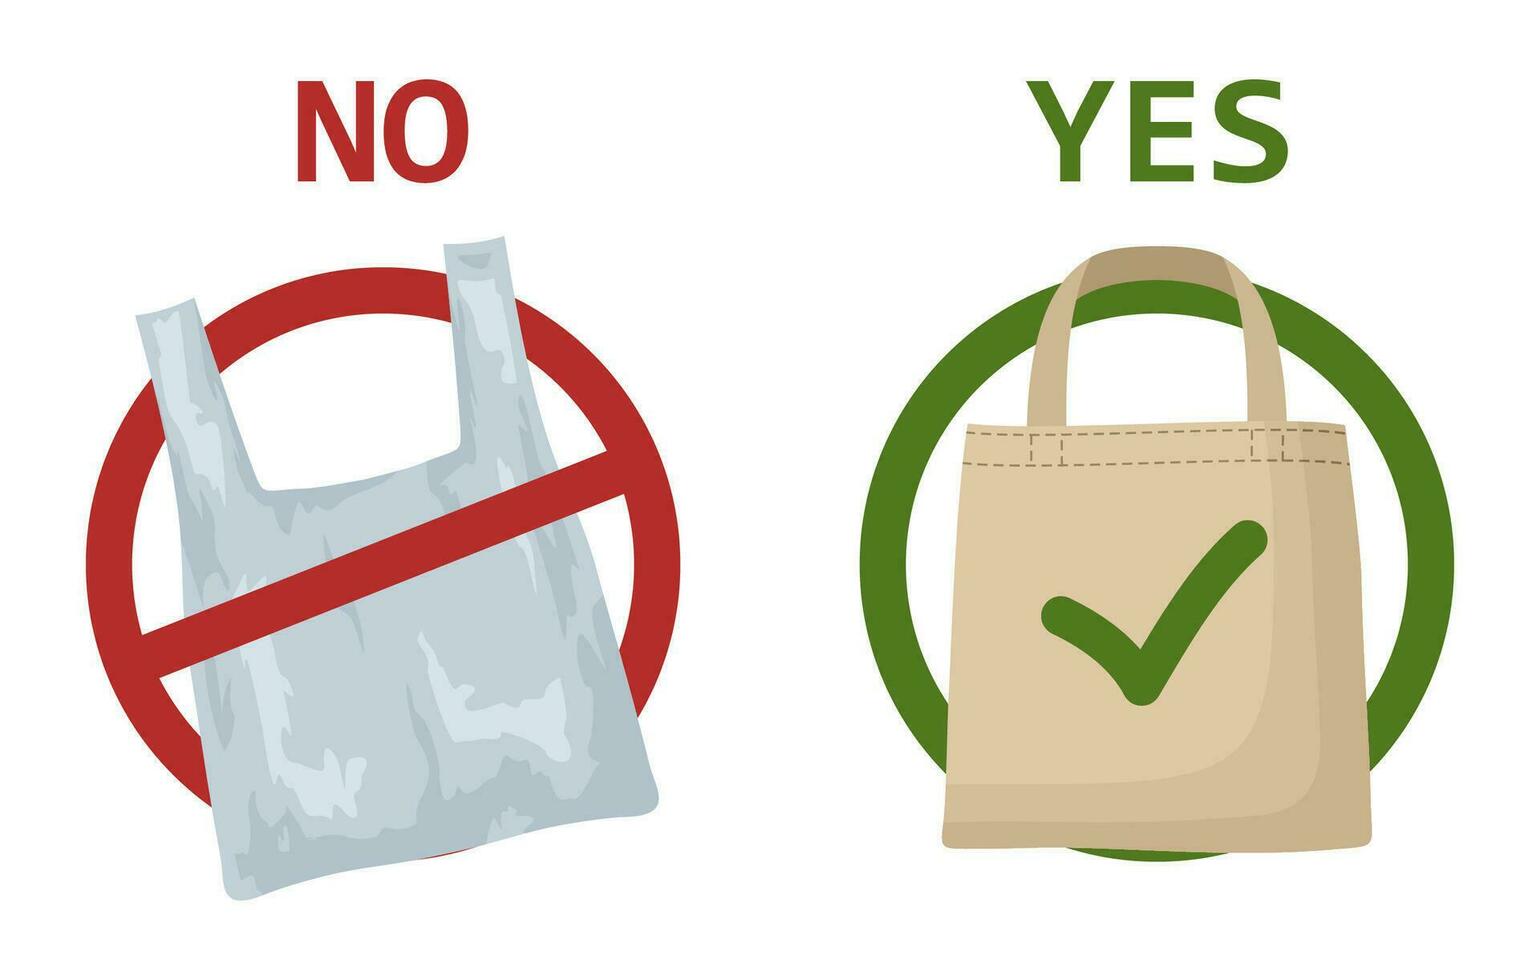 Pollution problem concept. Plastic bag and eco bag isolated on white background. Say no to plastic bags, bring your own textile bag. Signage calling for stop using disposable polythene package. Vector